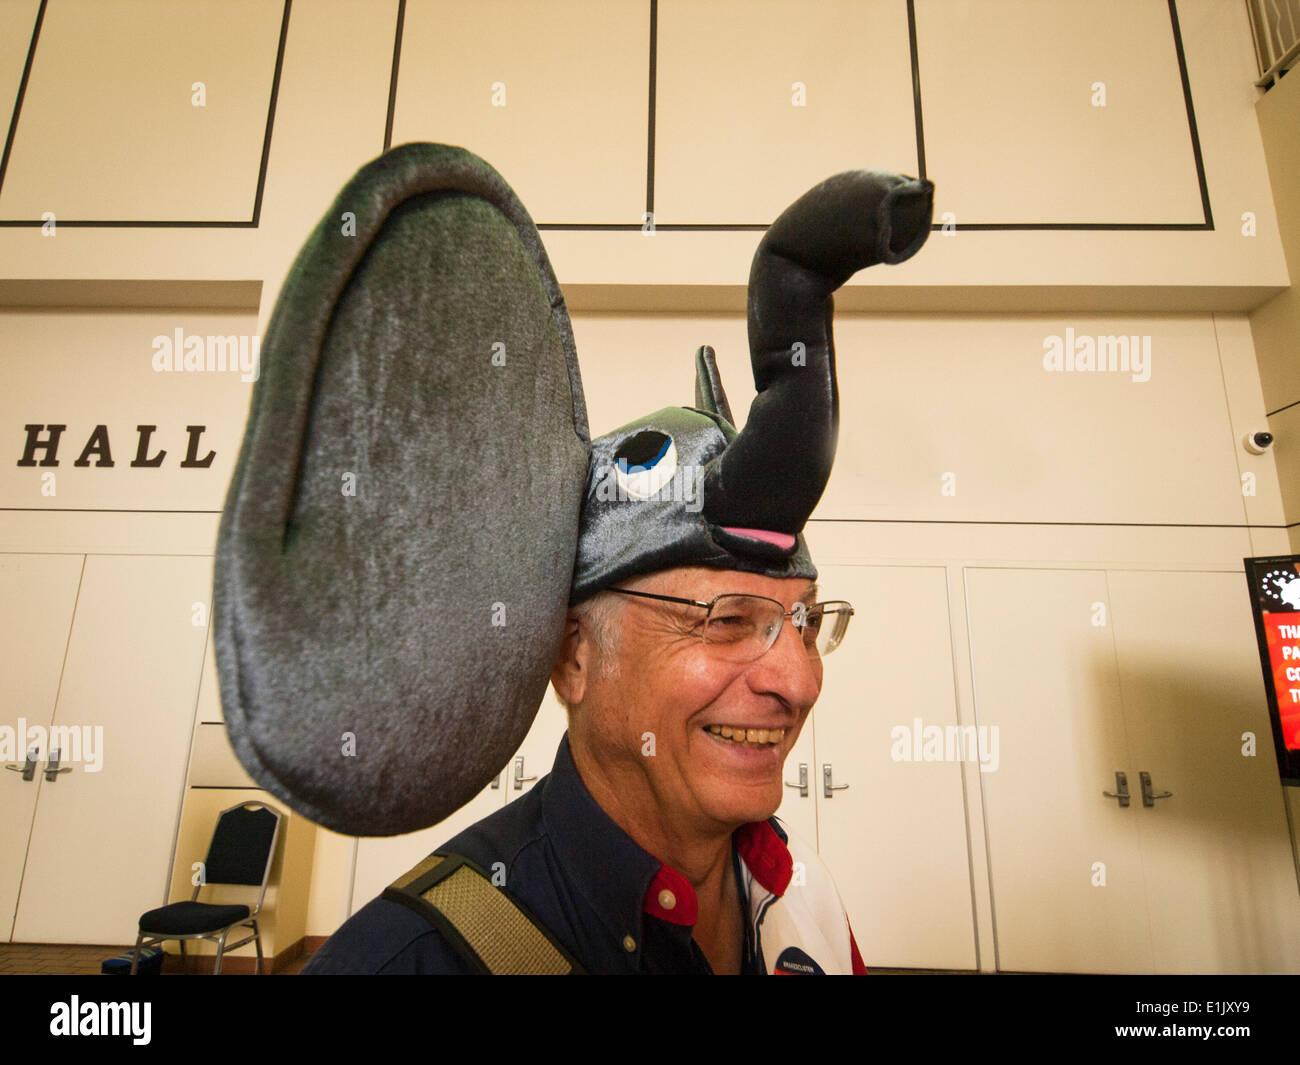 Ft, Worth, Texas, USA. 5th June 2014. At the Texas state Republican convention a Mark Pavlovich from Denton, Texas, shows his loyalty to the party wearing a hat to look like the GOP mascot elephant Credit:  J. G. Domke/Alamy Live News Stock Photo